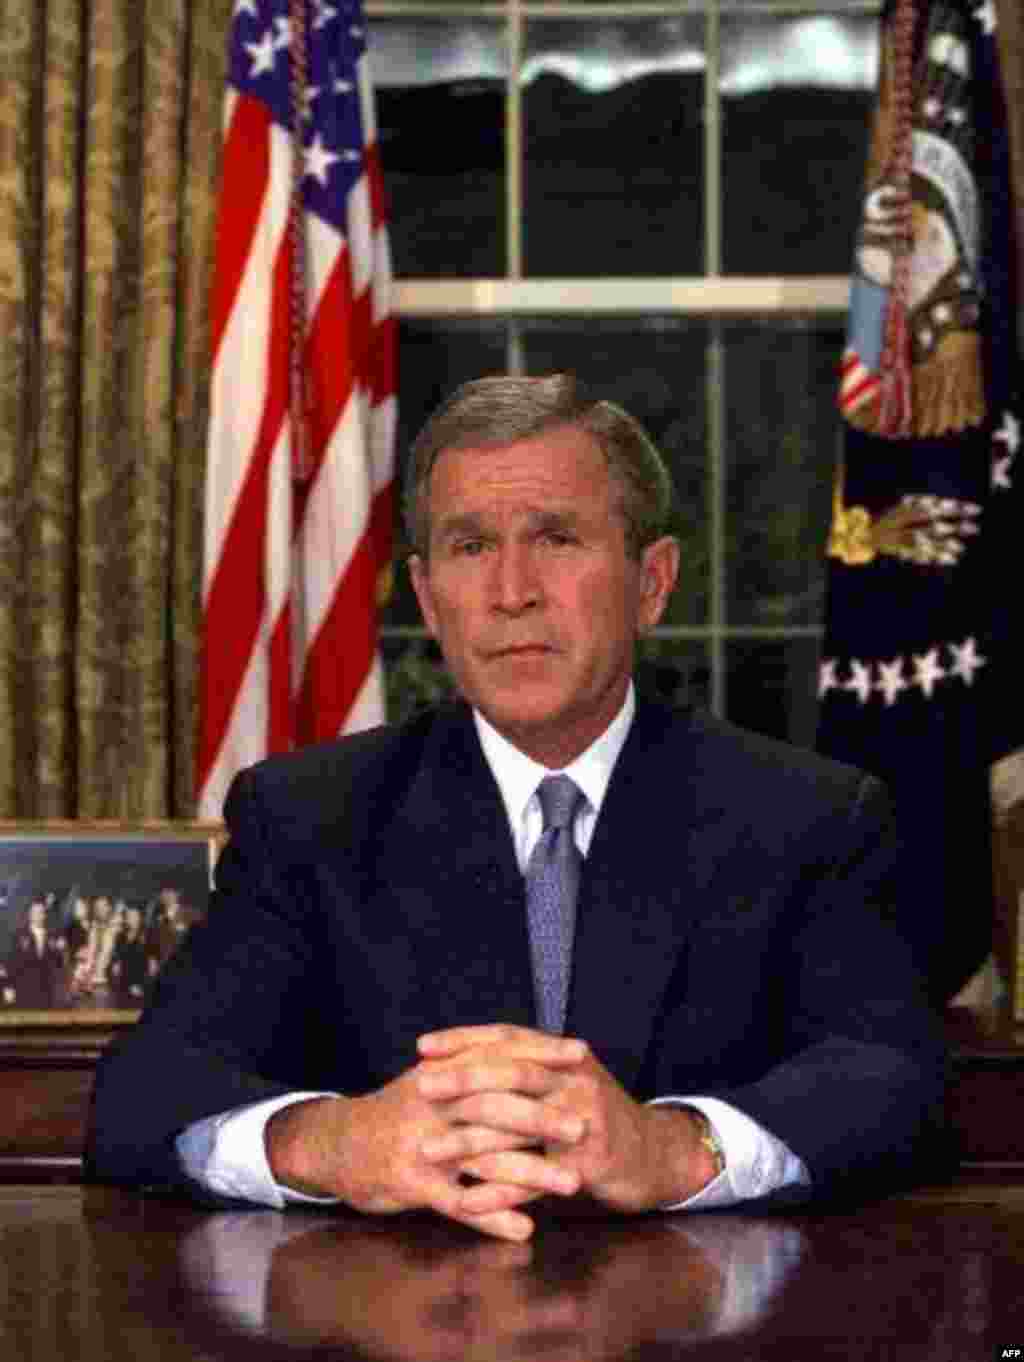 U.S. President George W. Bush addresses the nation from the Oval Office about the terrorist attacks at the World Trade Center and the Pentagon, Tuesday, Sept. 11, 2001. Bush said "Freedom itself has been attacked this morning by a faceless coward." (AP P